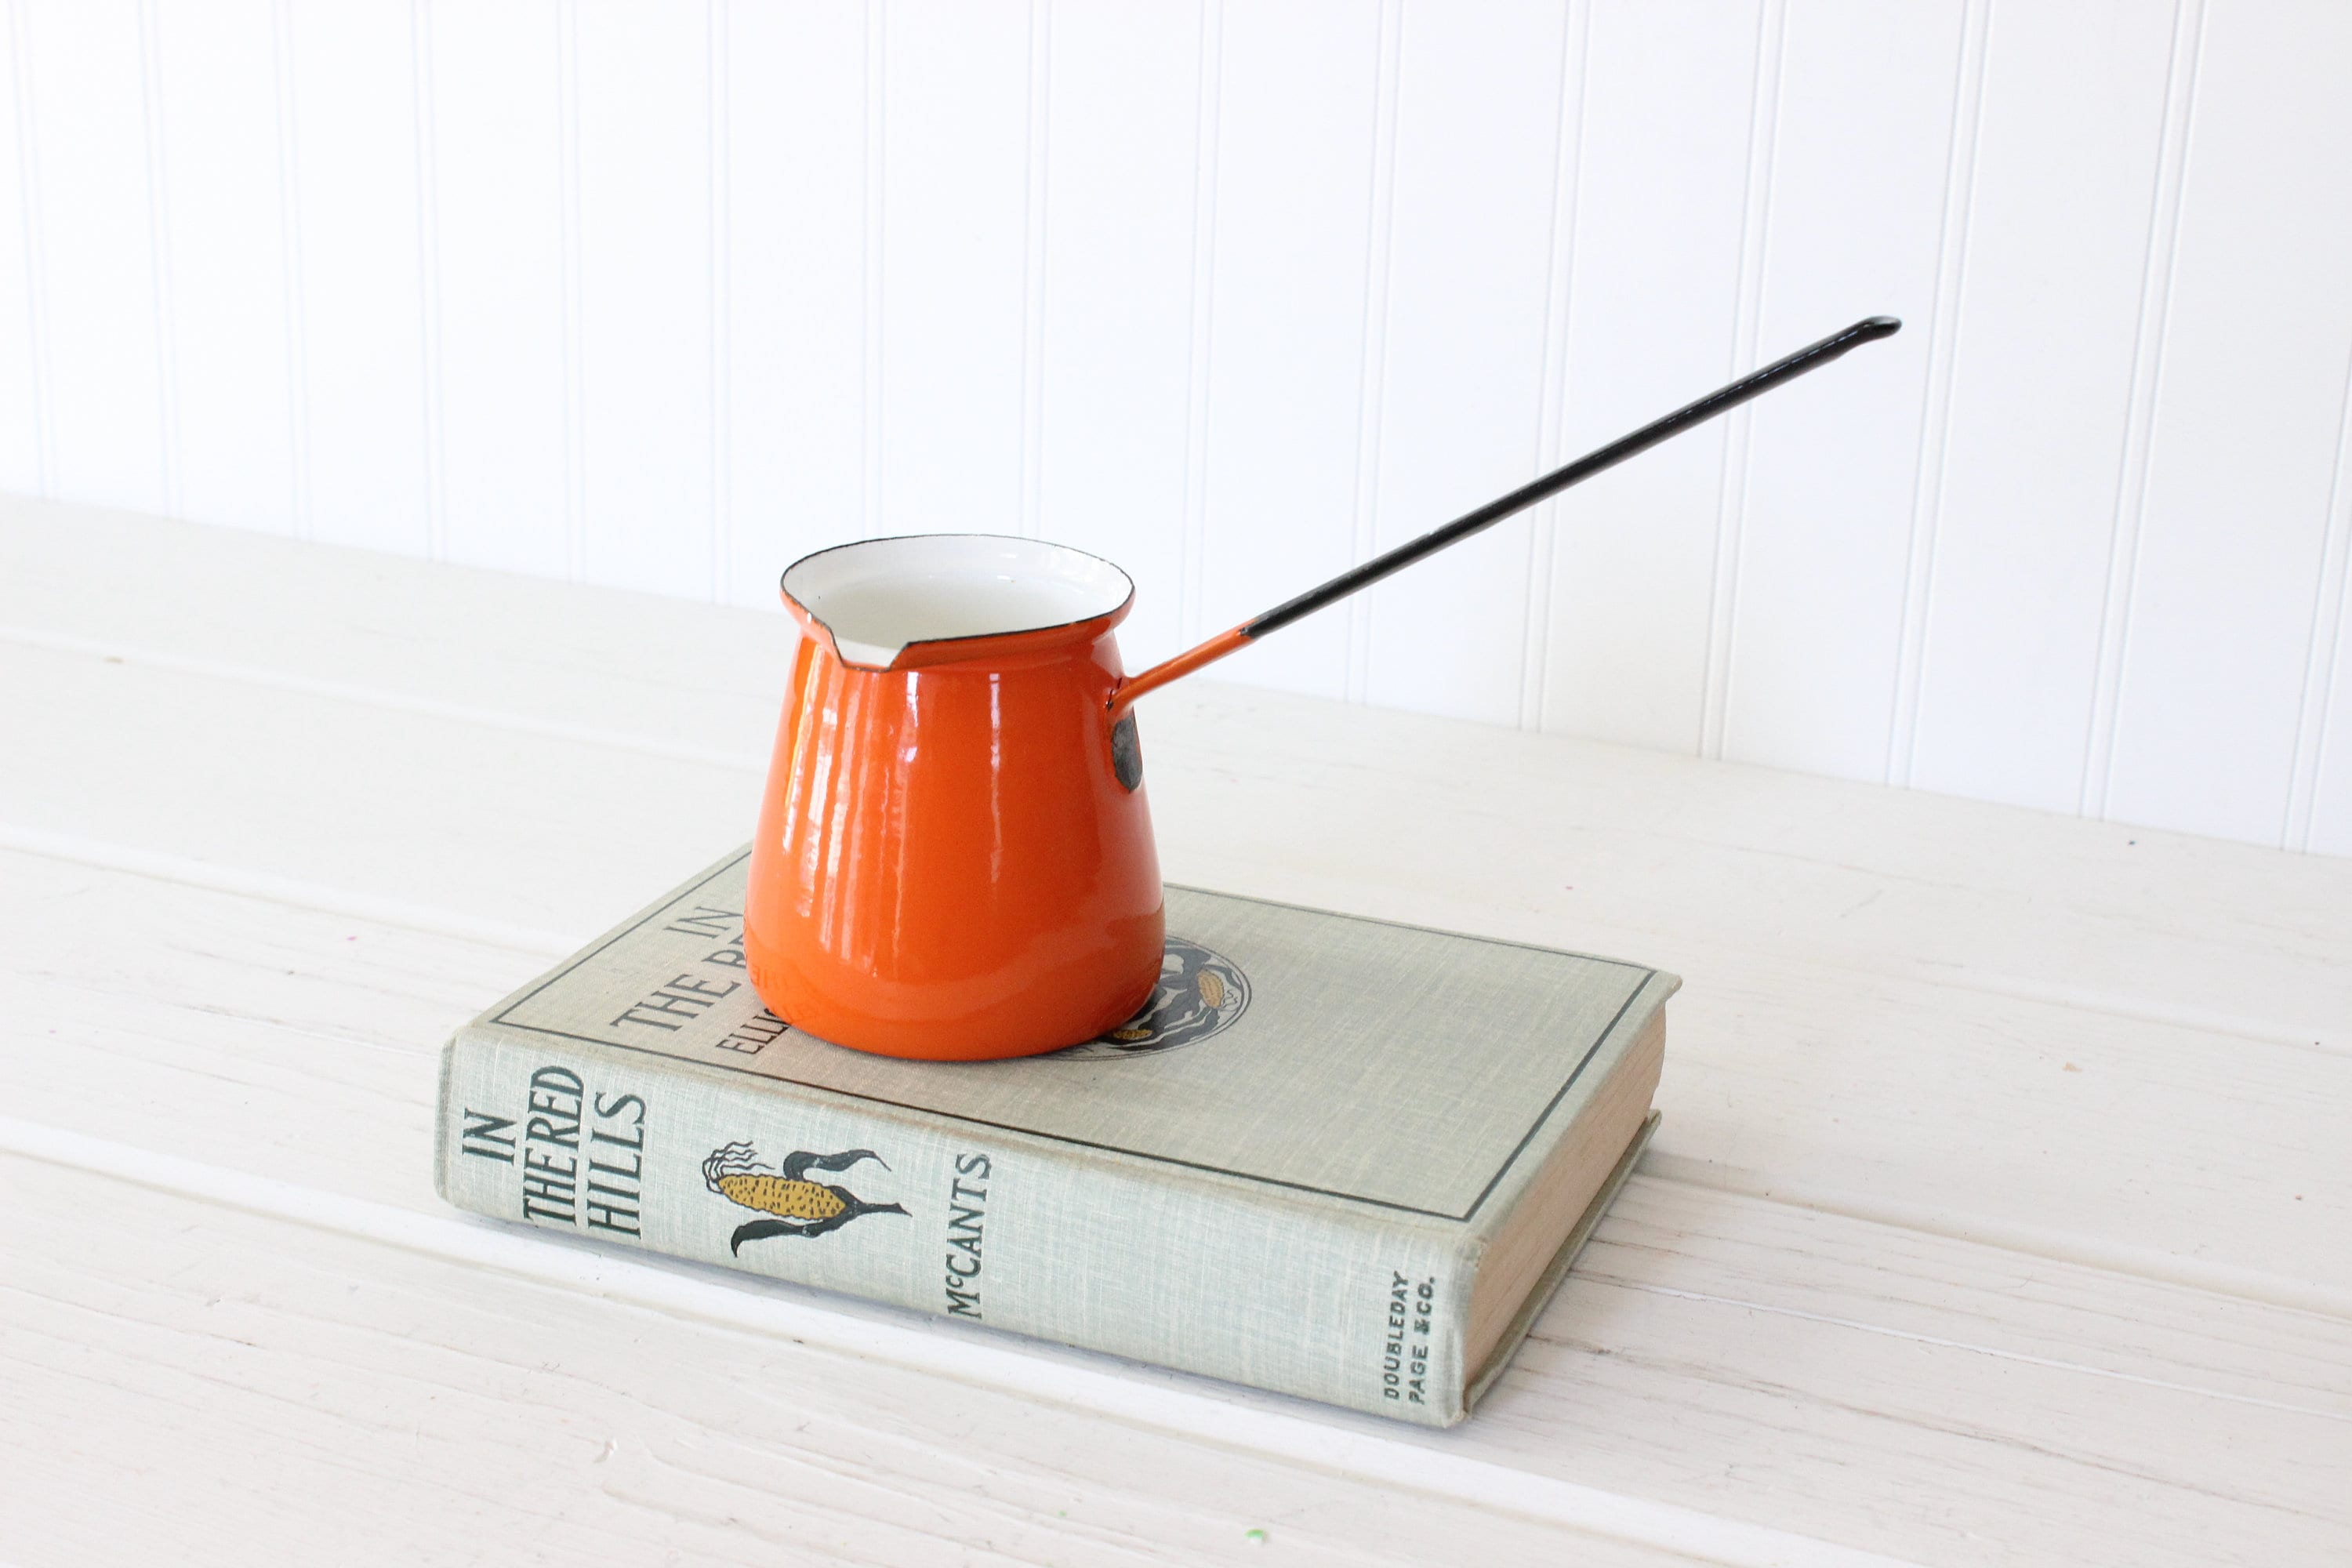 Rustic, Enamel, Bright Orange and White, Long Handled Butter Melter,  Kitchen Decor, Wall Hanging, Rustic Kitchen Tool 